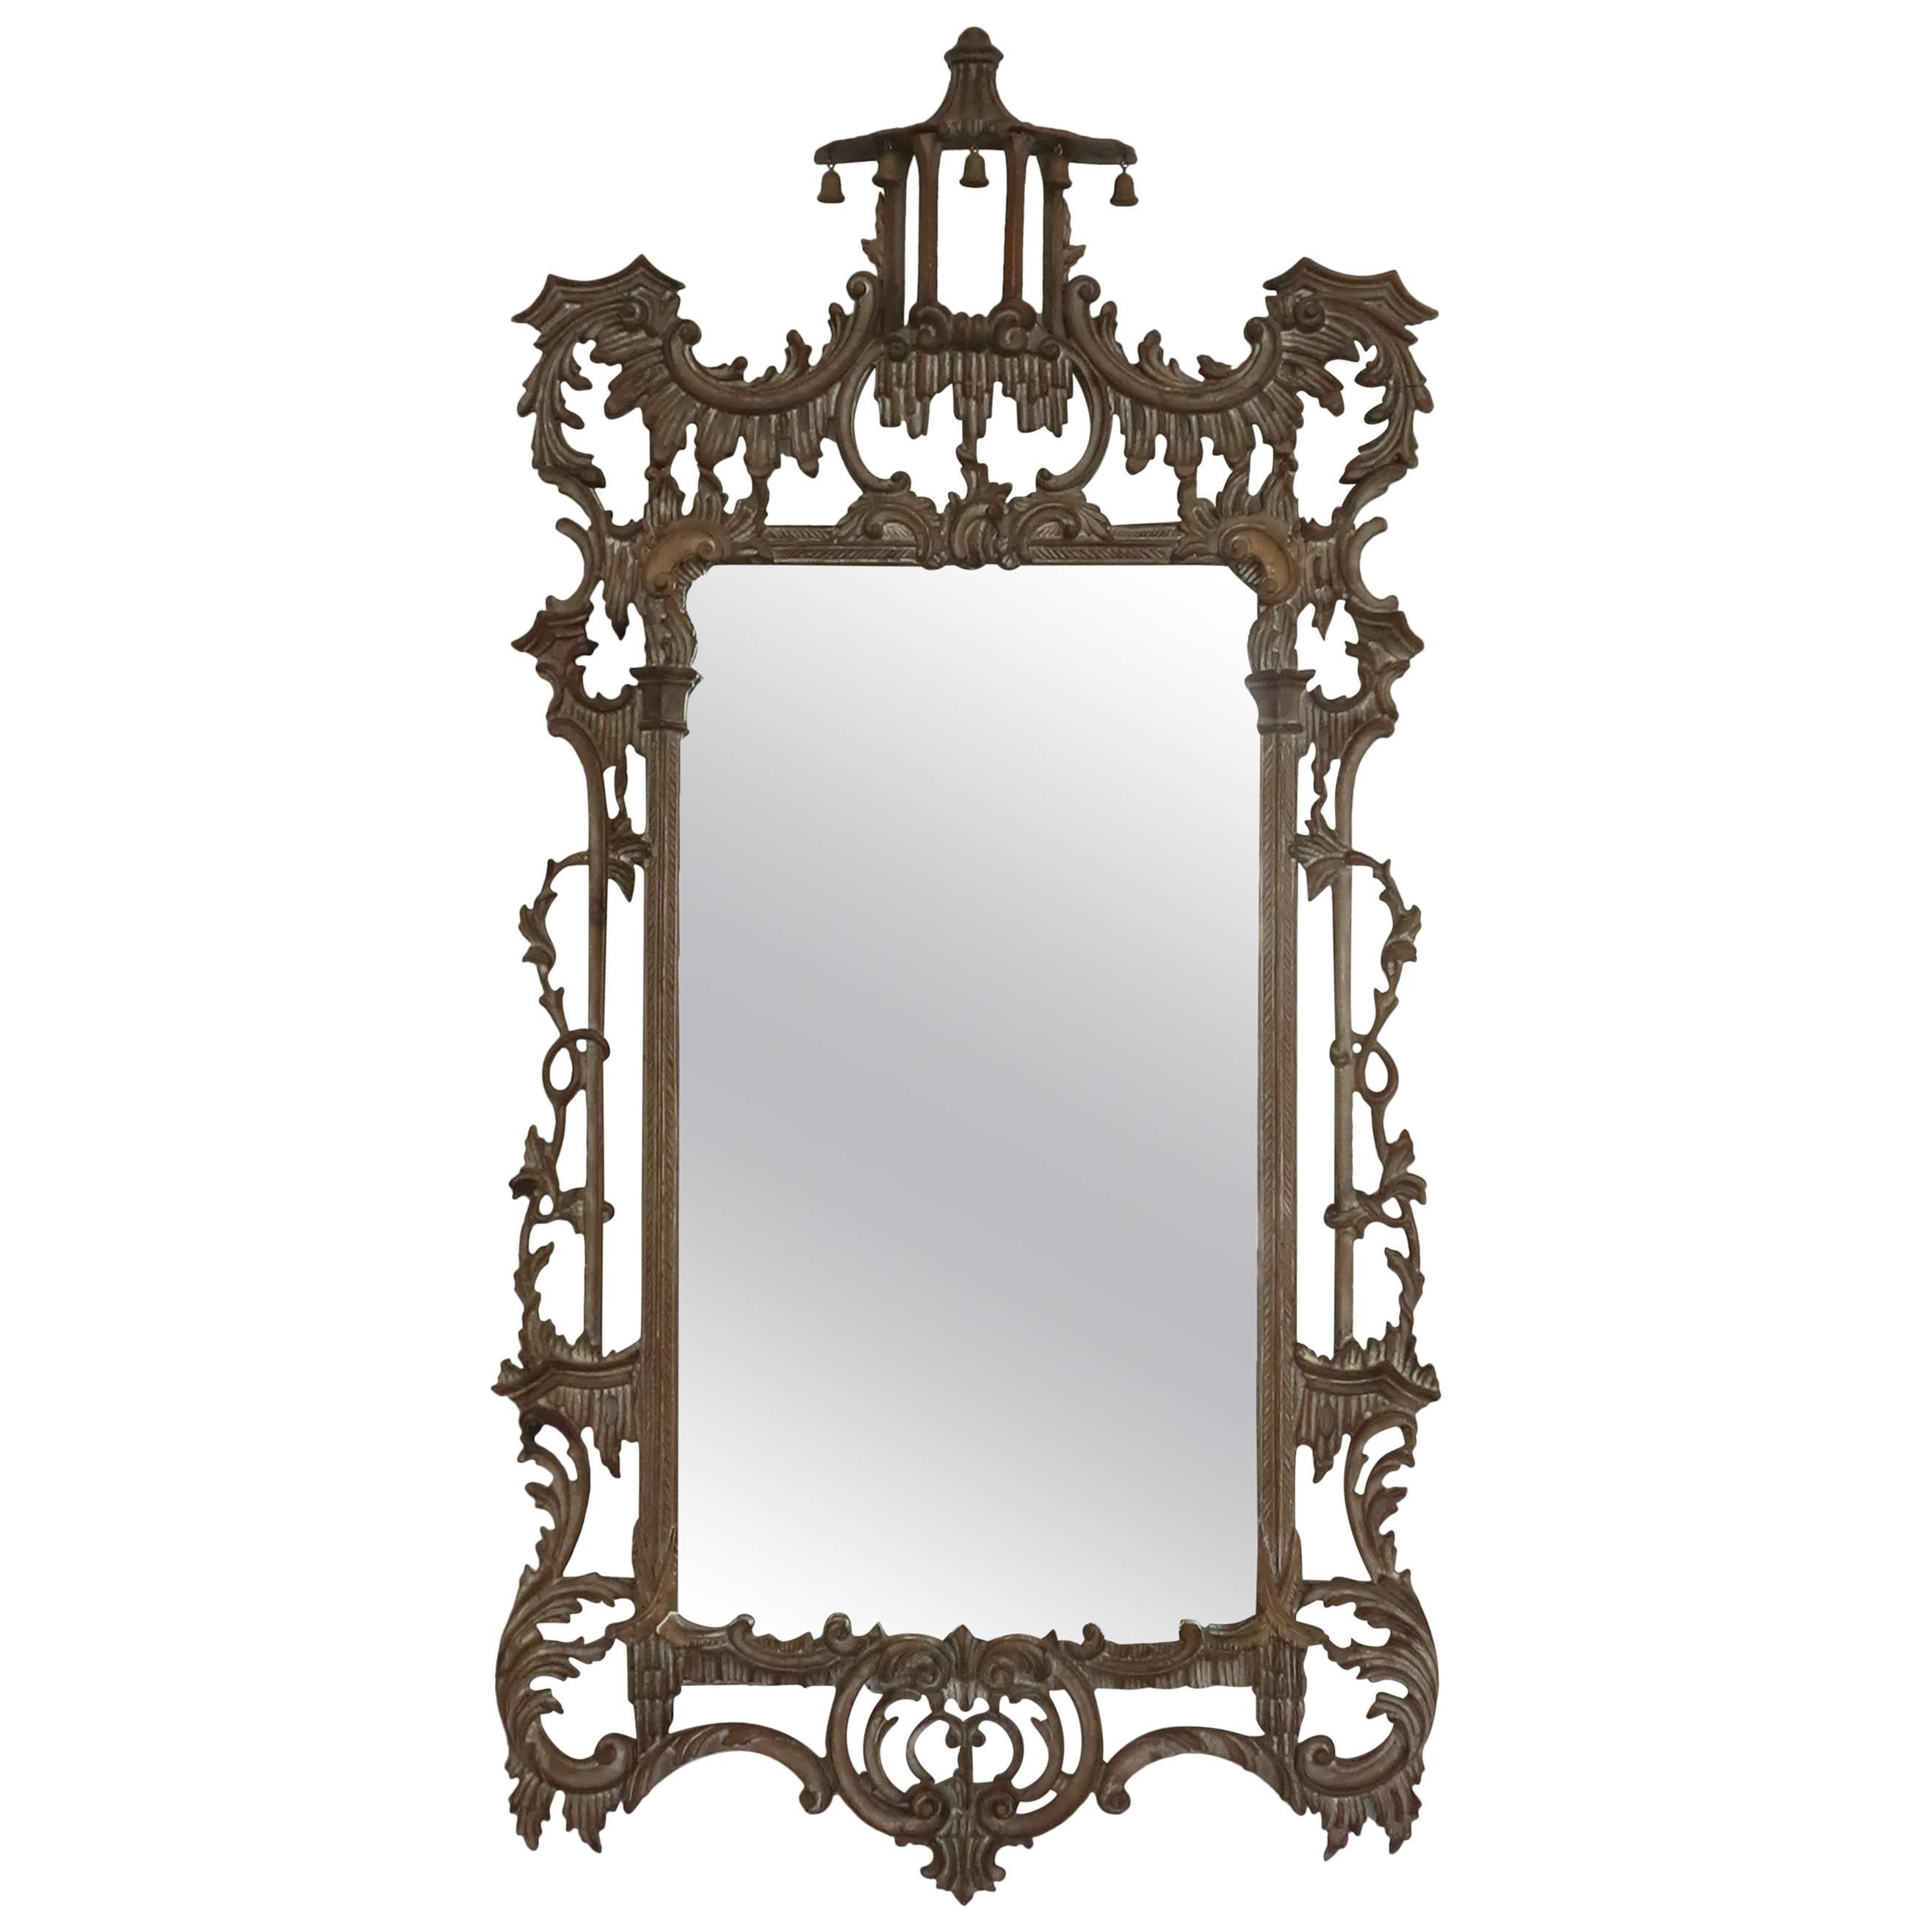 Chinese Chippendale Hand-Carved wood Mirror